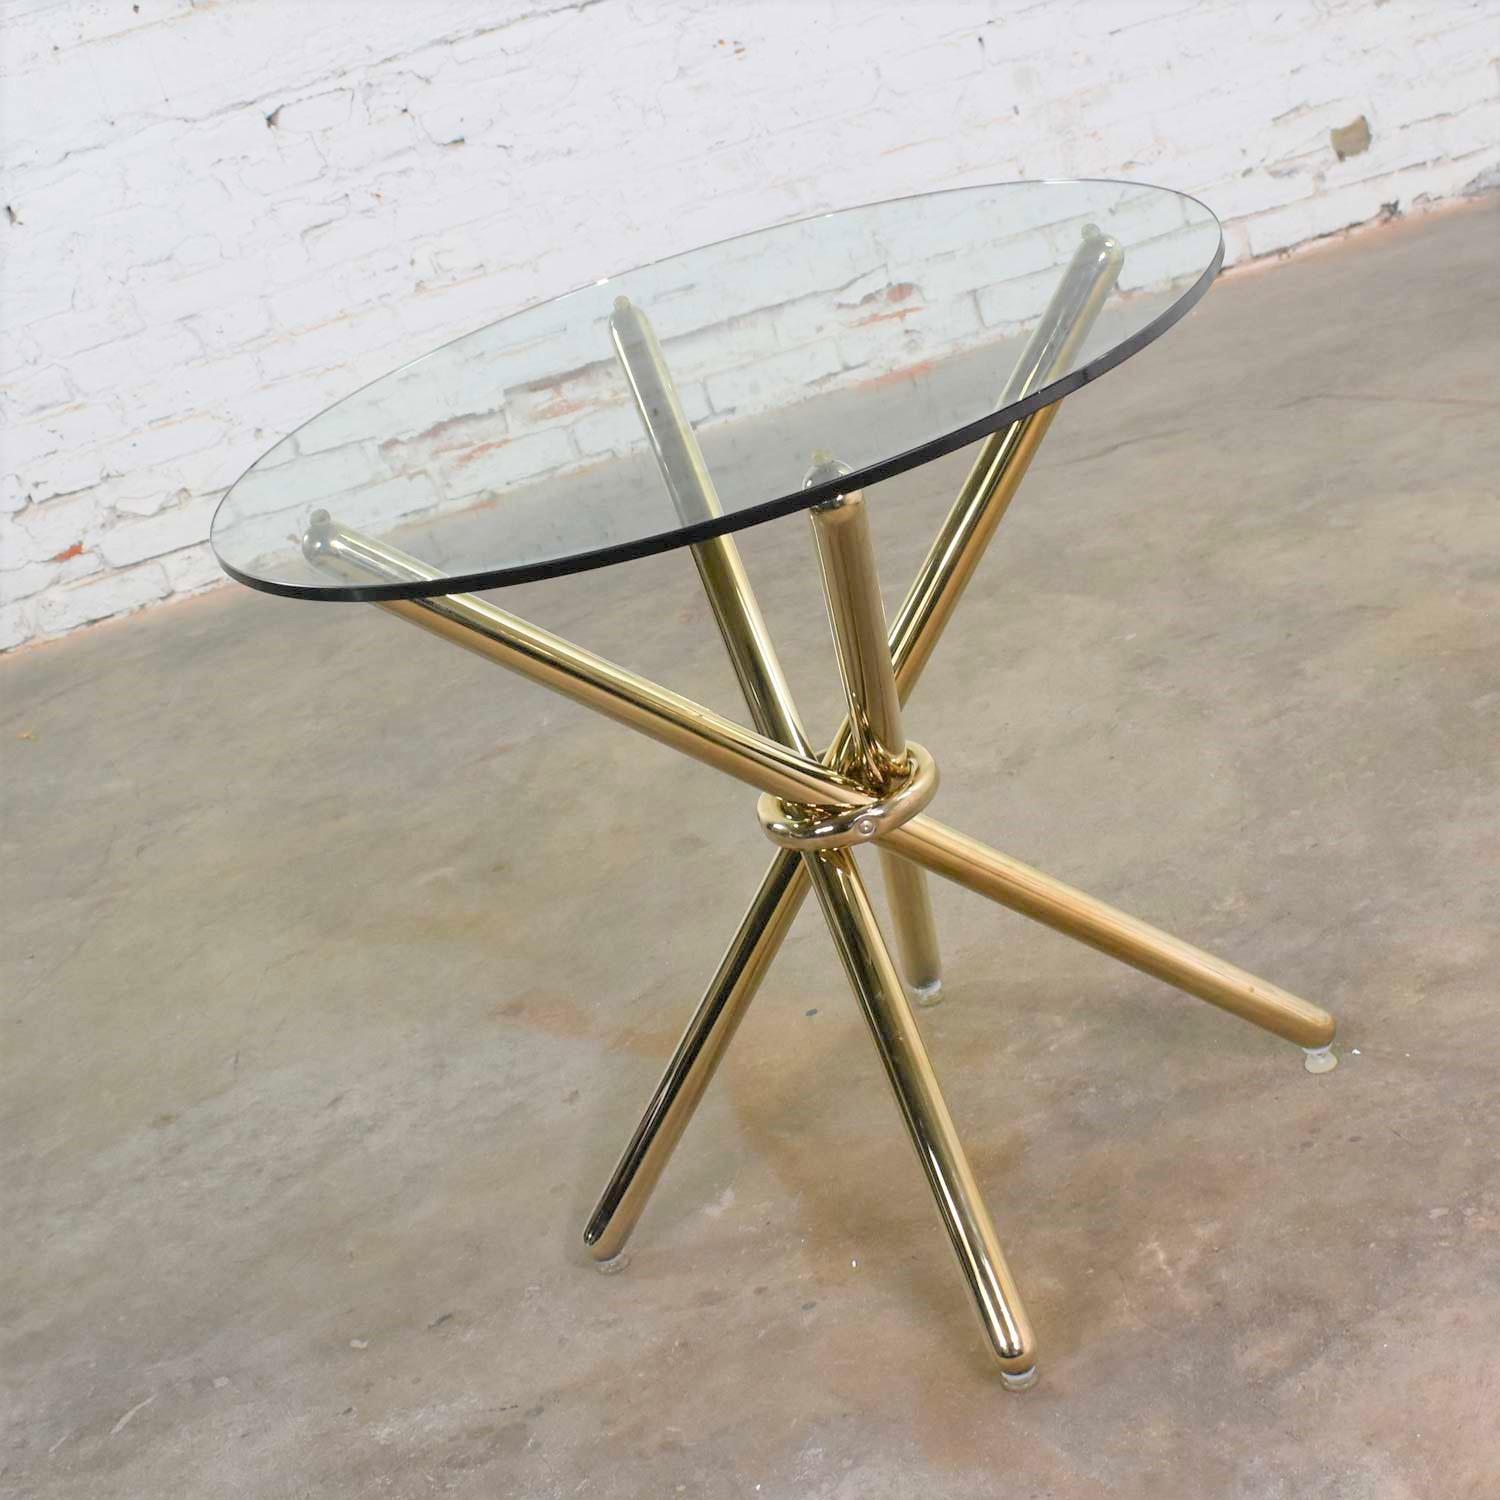 Vintage Modern Brass-Plated Jax Center or End Table with Round Glass Top 6